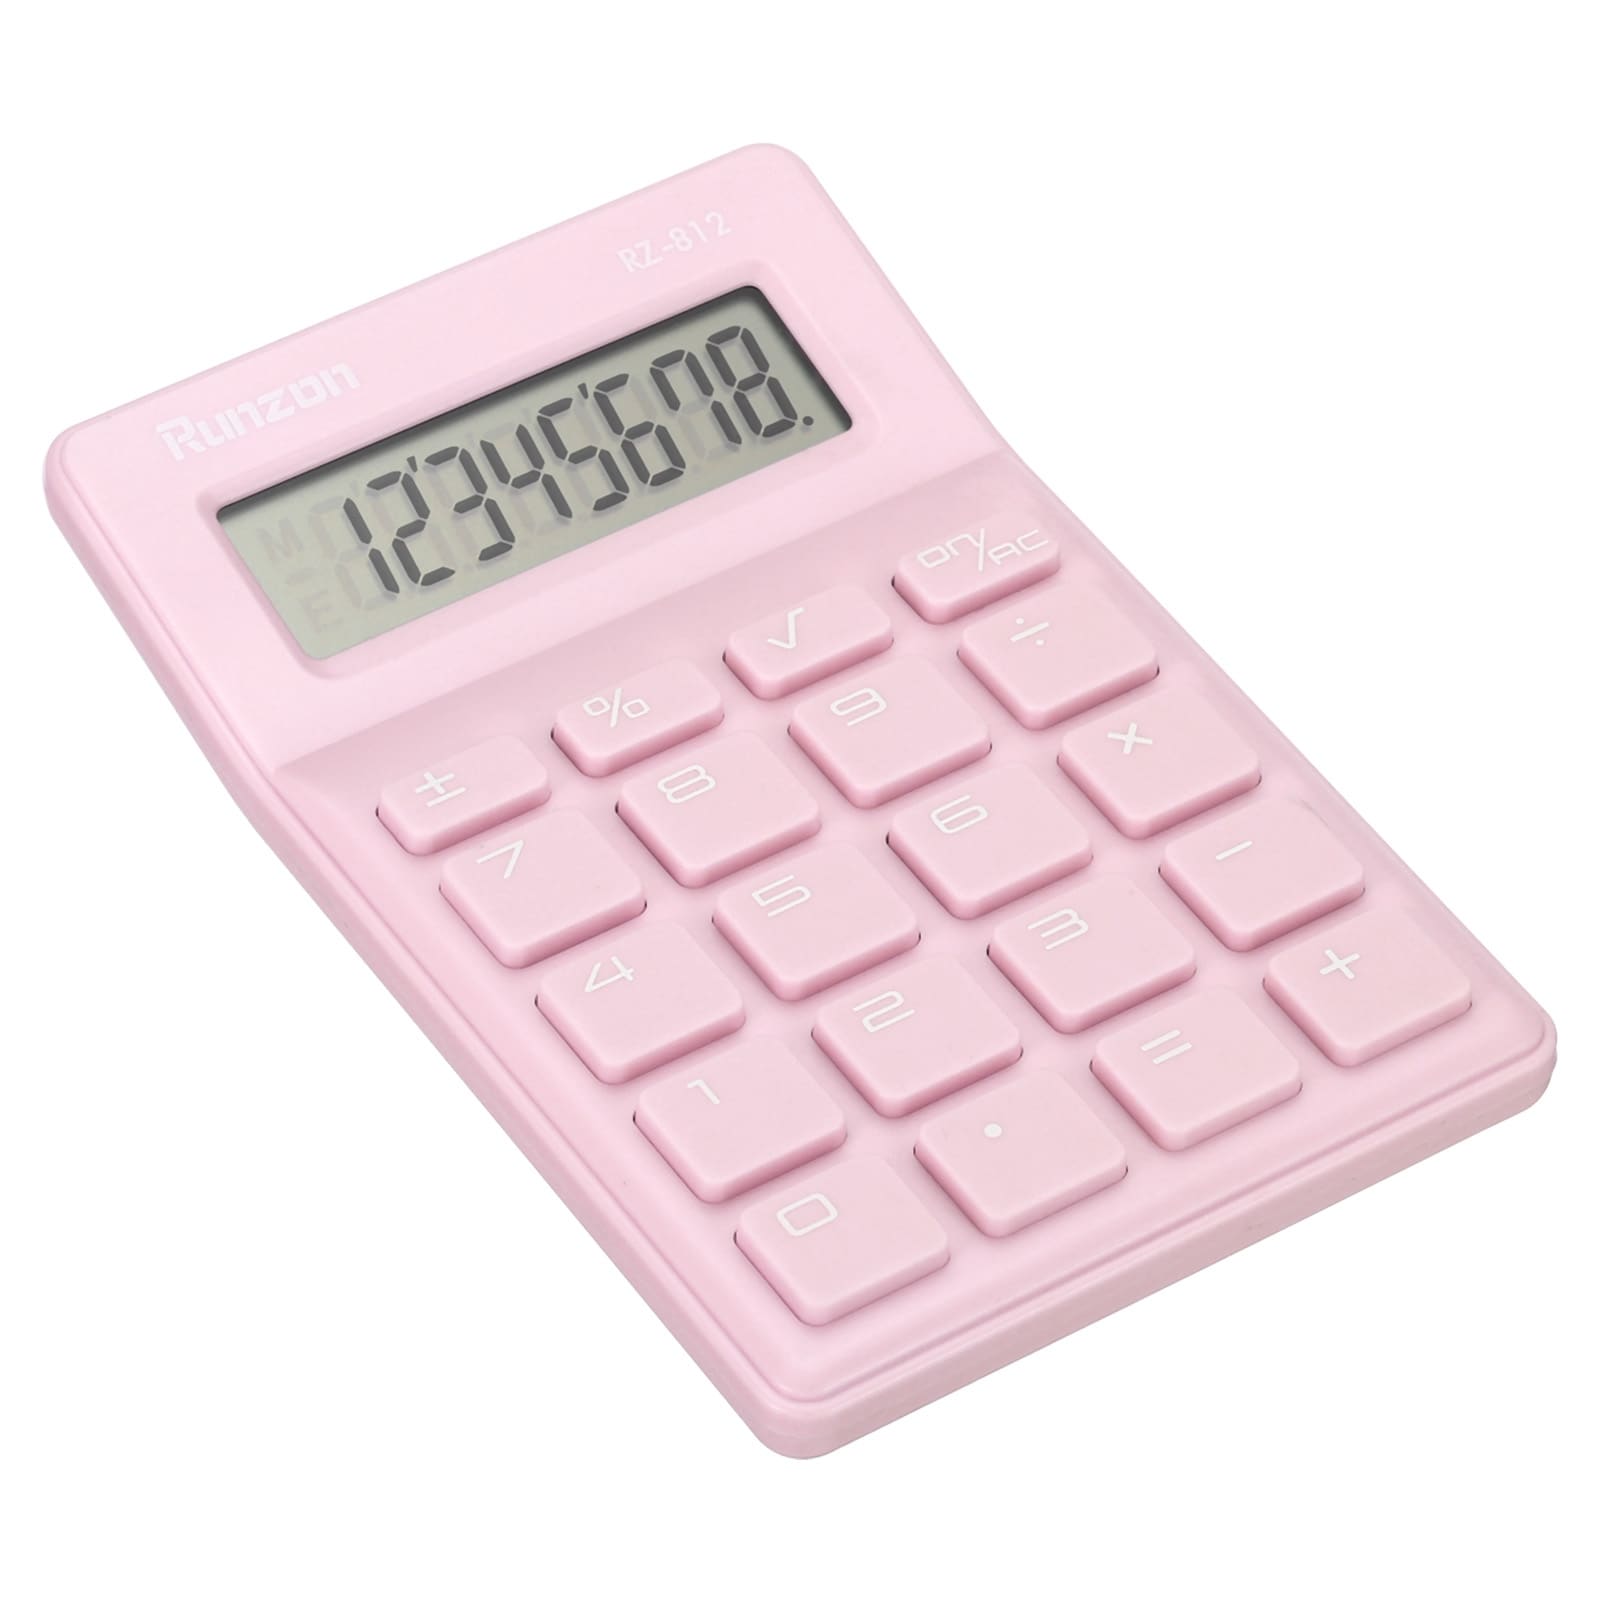 Desk Basic Cute Calculator Battery Powered with 8 Digit Style 2